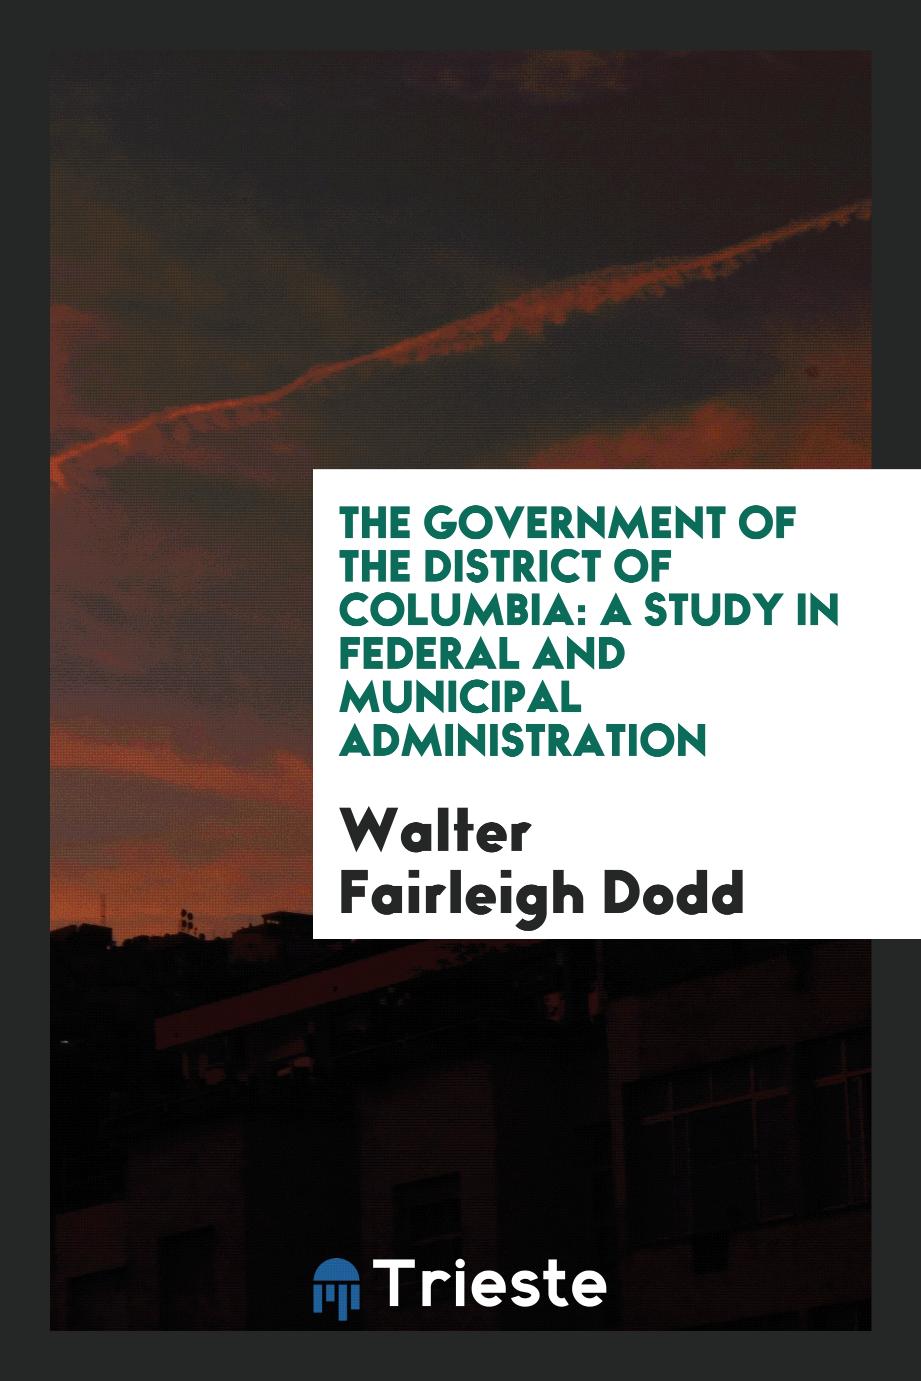 The Government of the District of Columbia: A Study in Federal and Municipal Administration